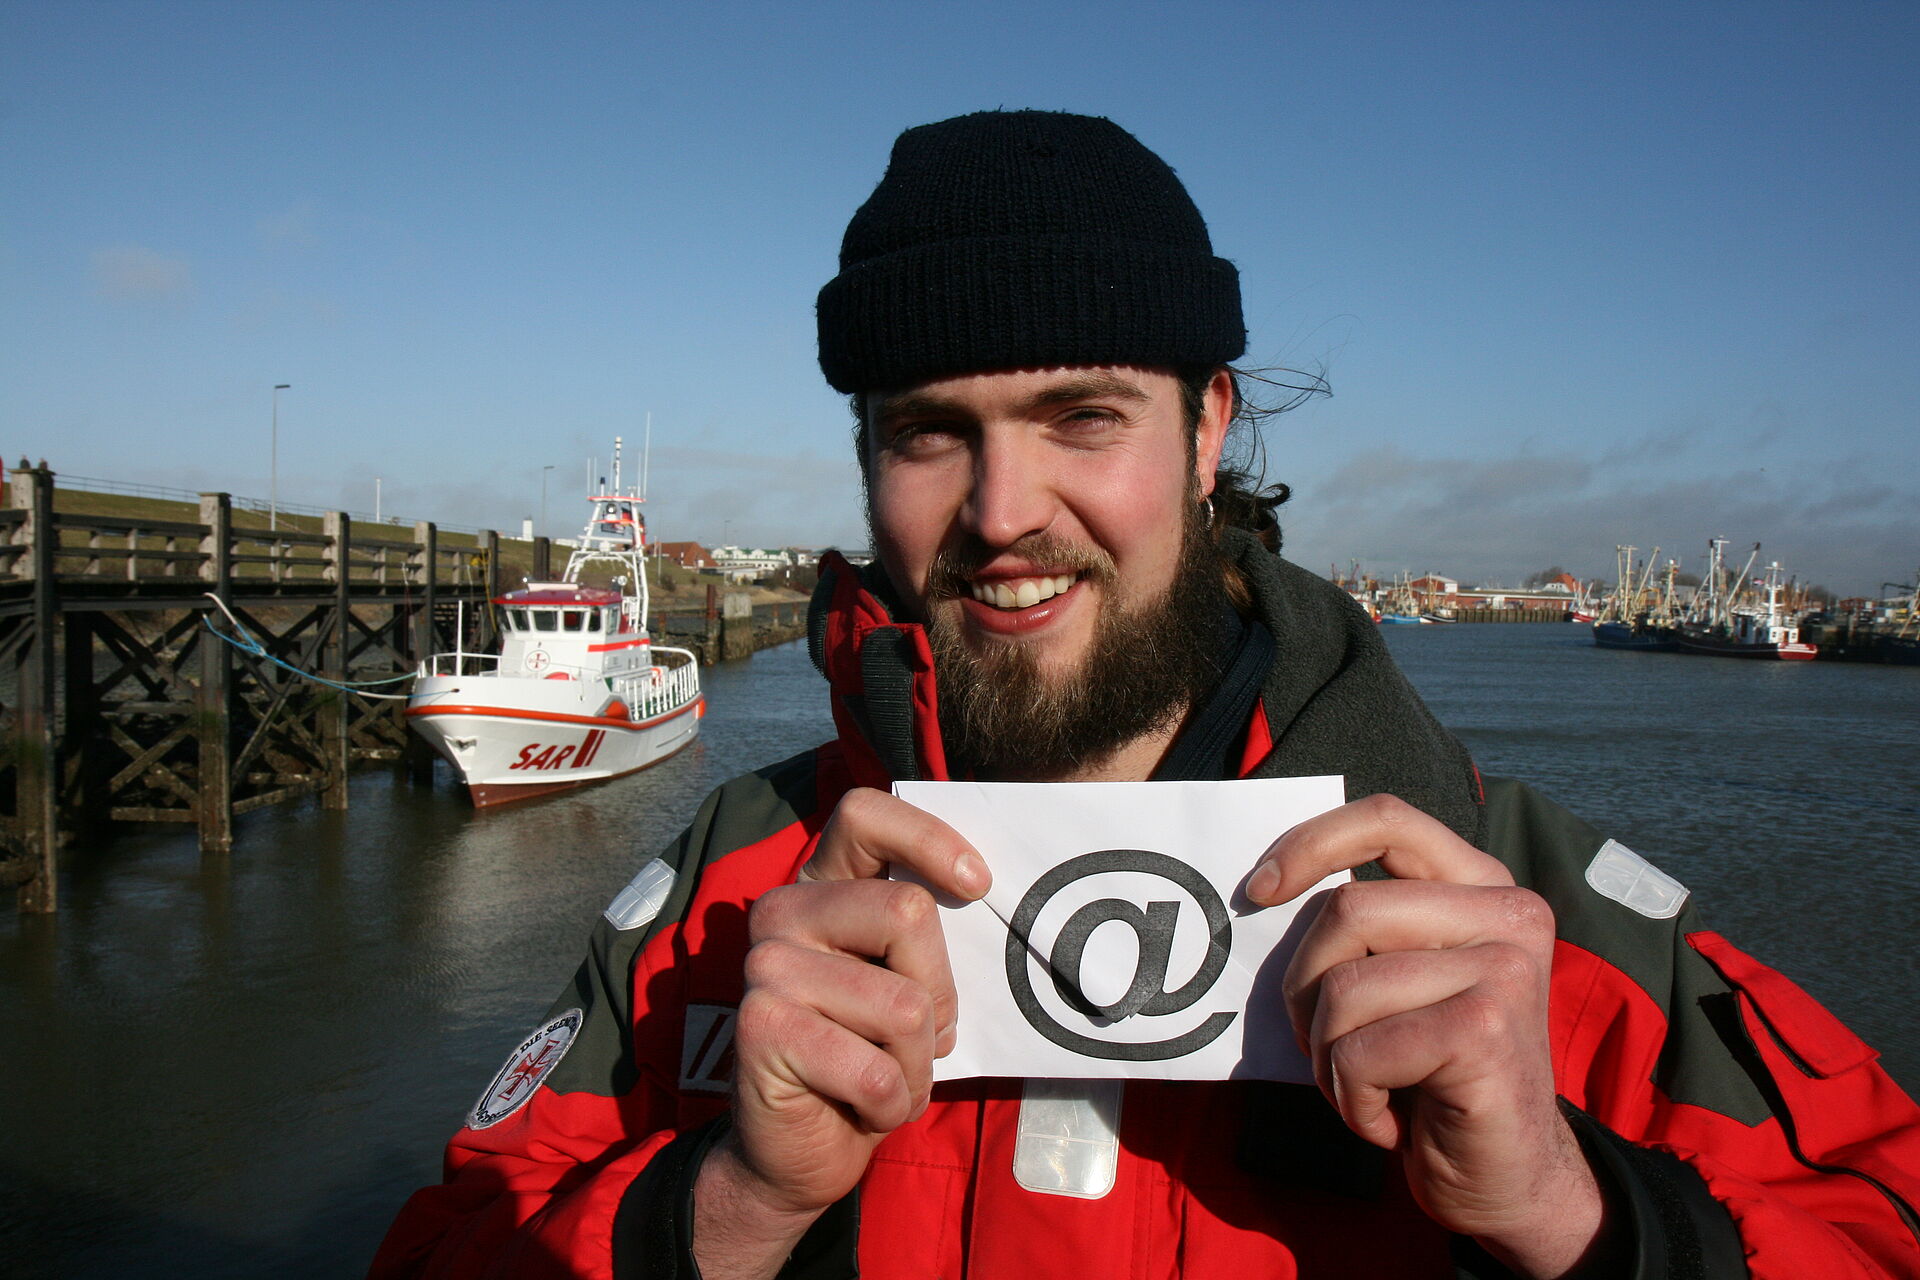 A rescuer in the harbour shows an envelope with an at-sign